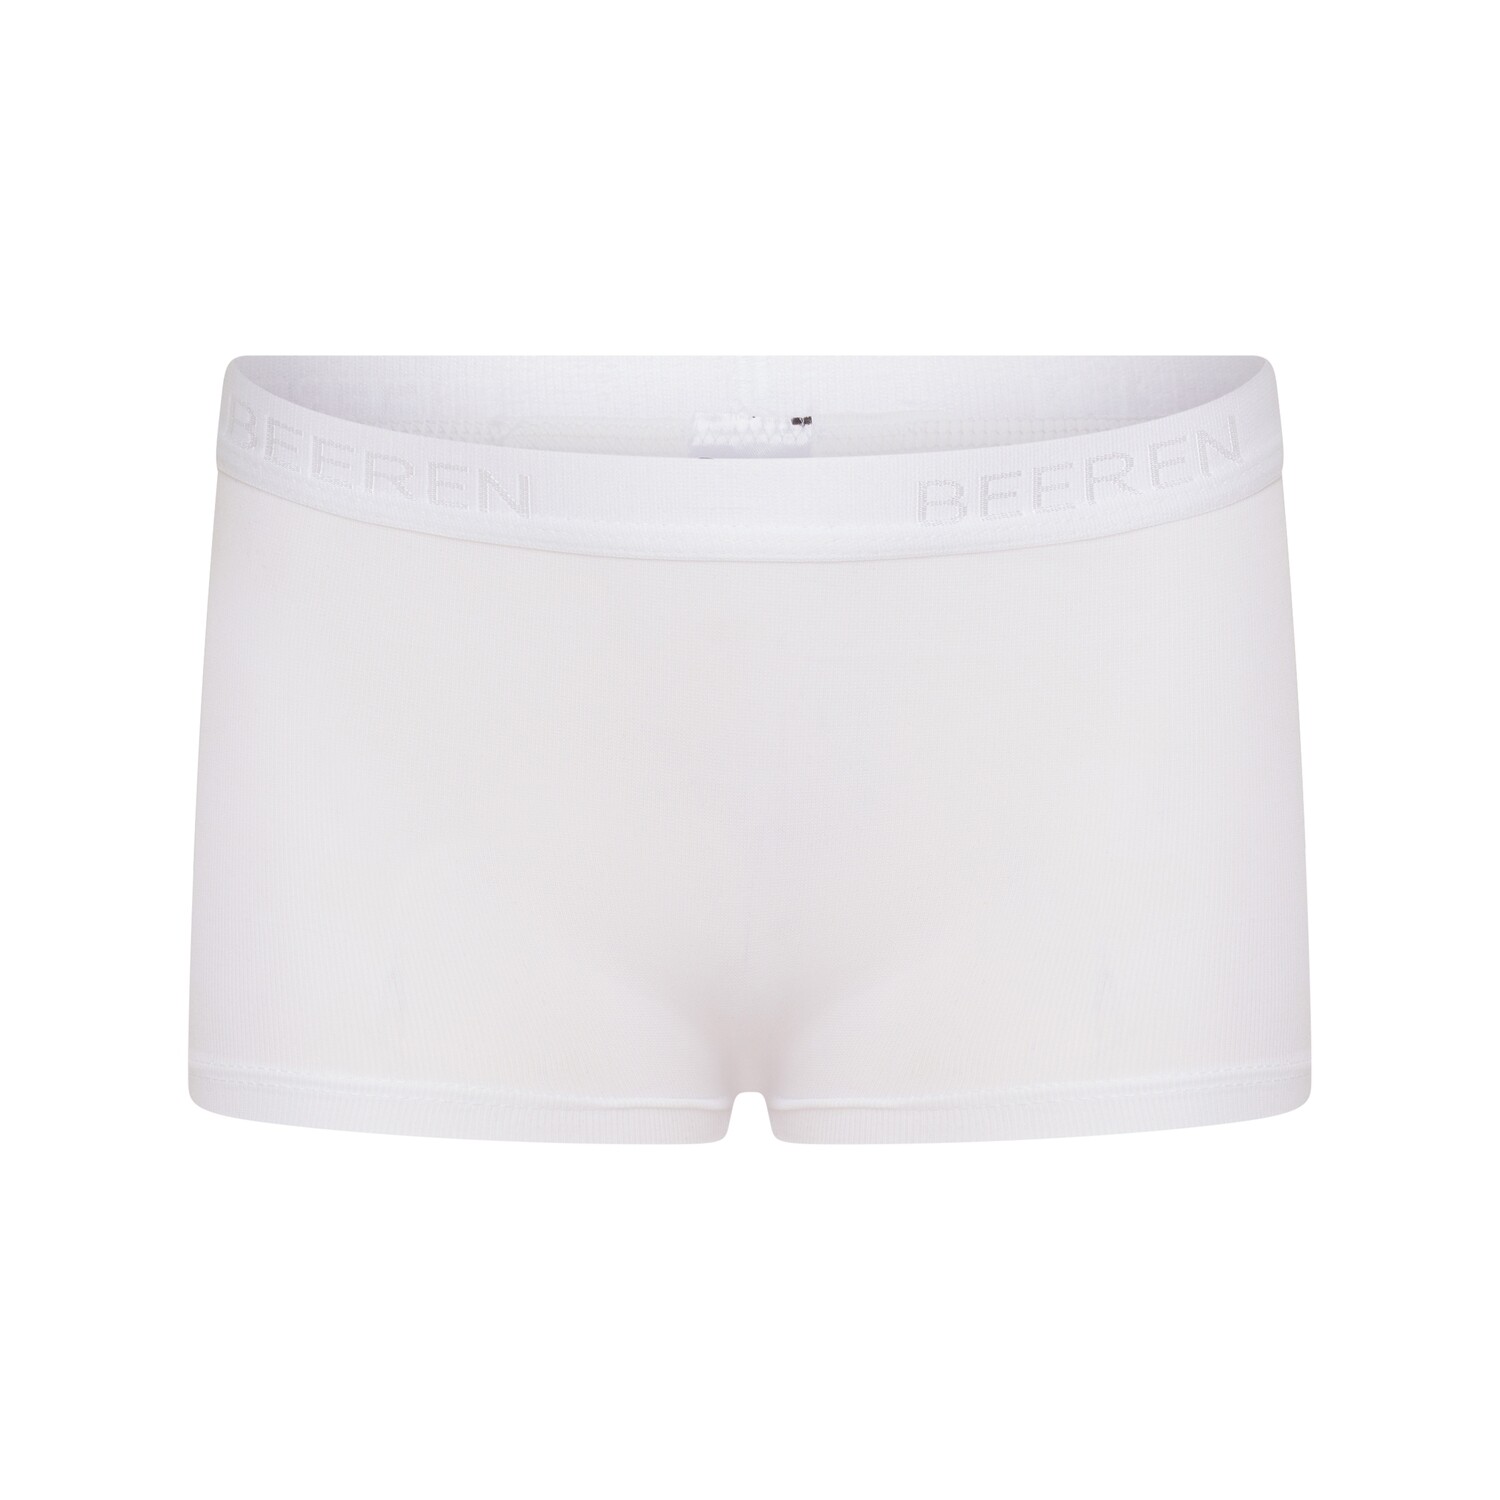 (21-153) Meisjes boxer Young wit 104/116